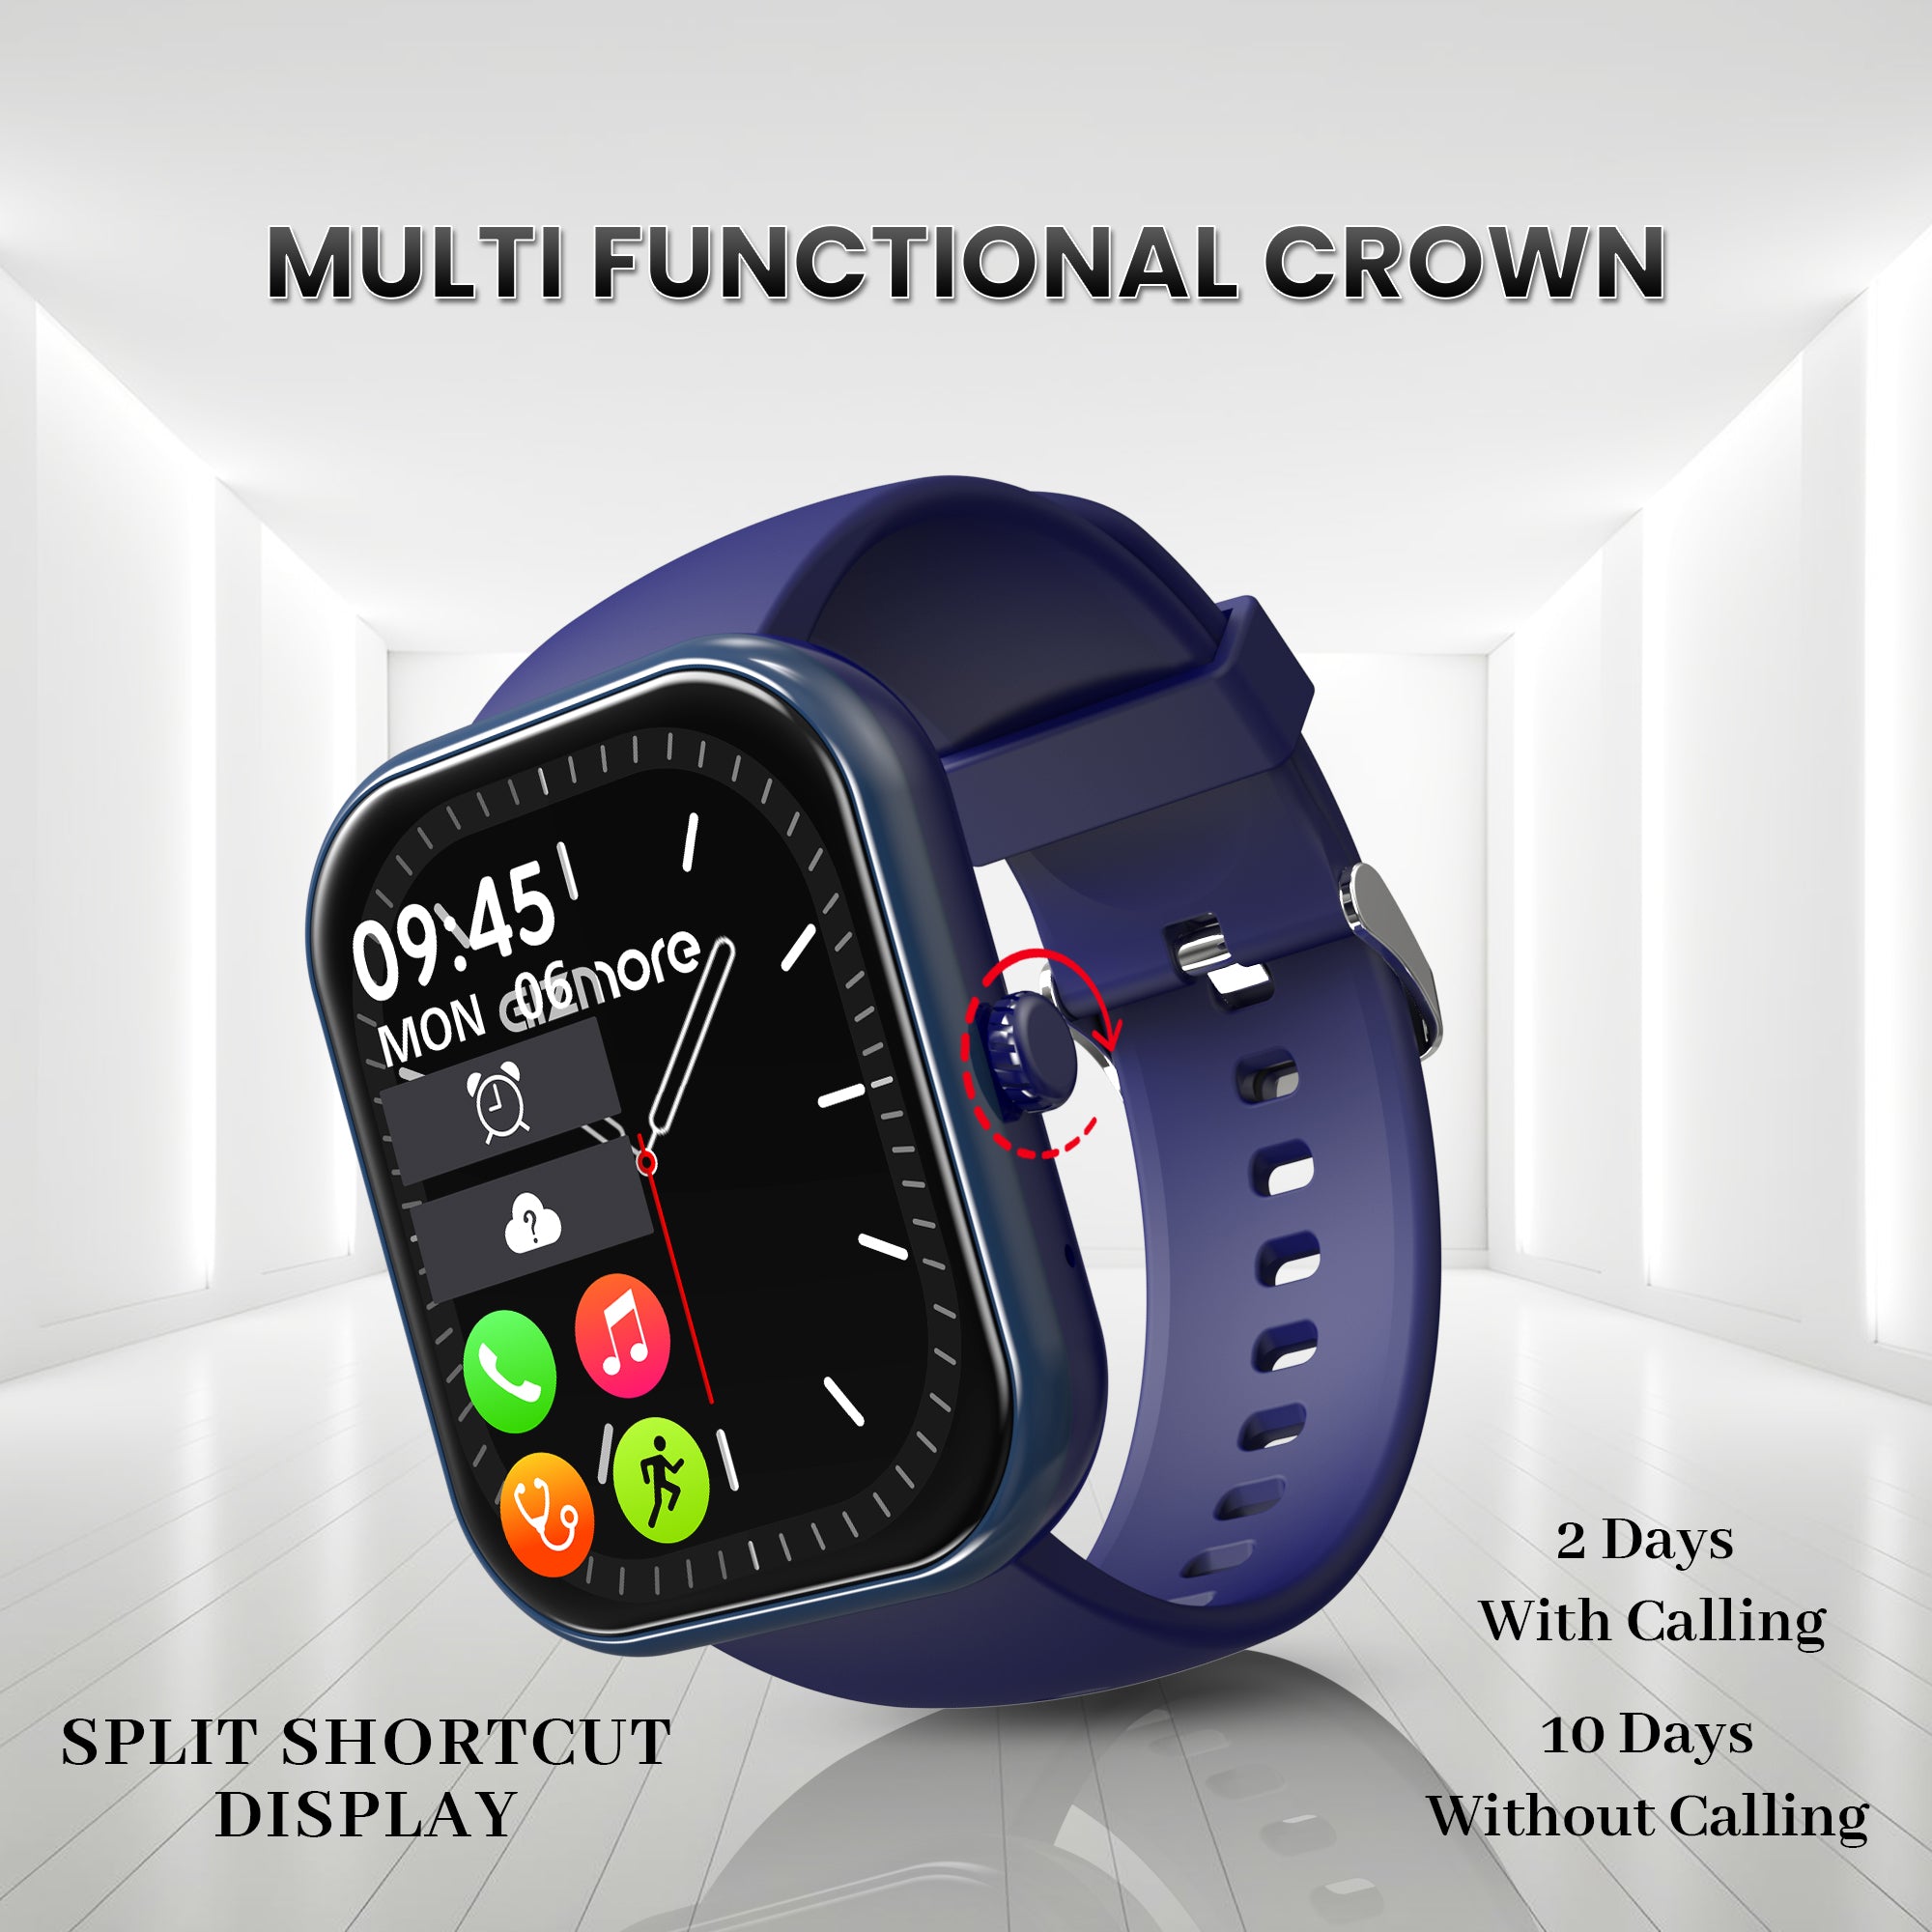 GIZMORE Ultra Max 2.01 (5.11 cm) Always-On-Big Display | 600 NITS Brightness & Split Screen | AI Voice Assistance | Rotating Crown | Health Suite | Bluetooth Calling Smart Watch for Men and Women